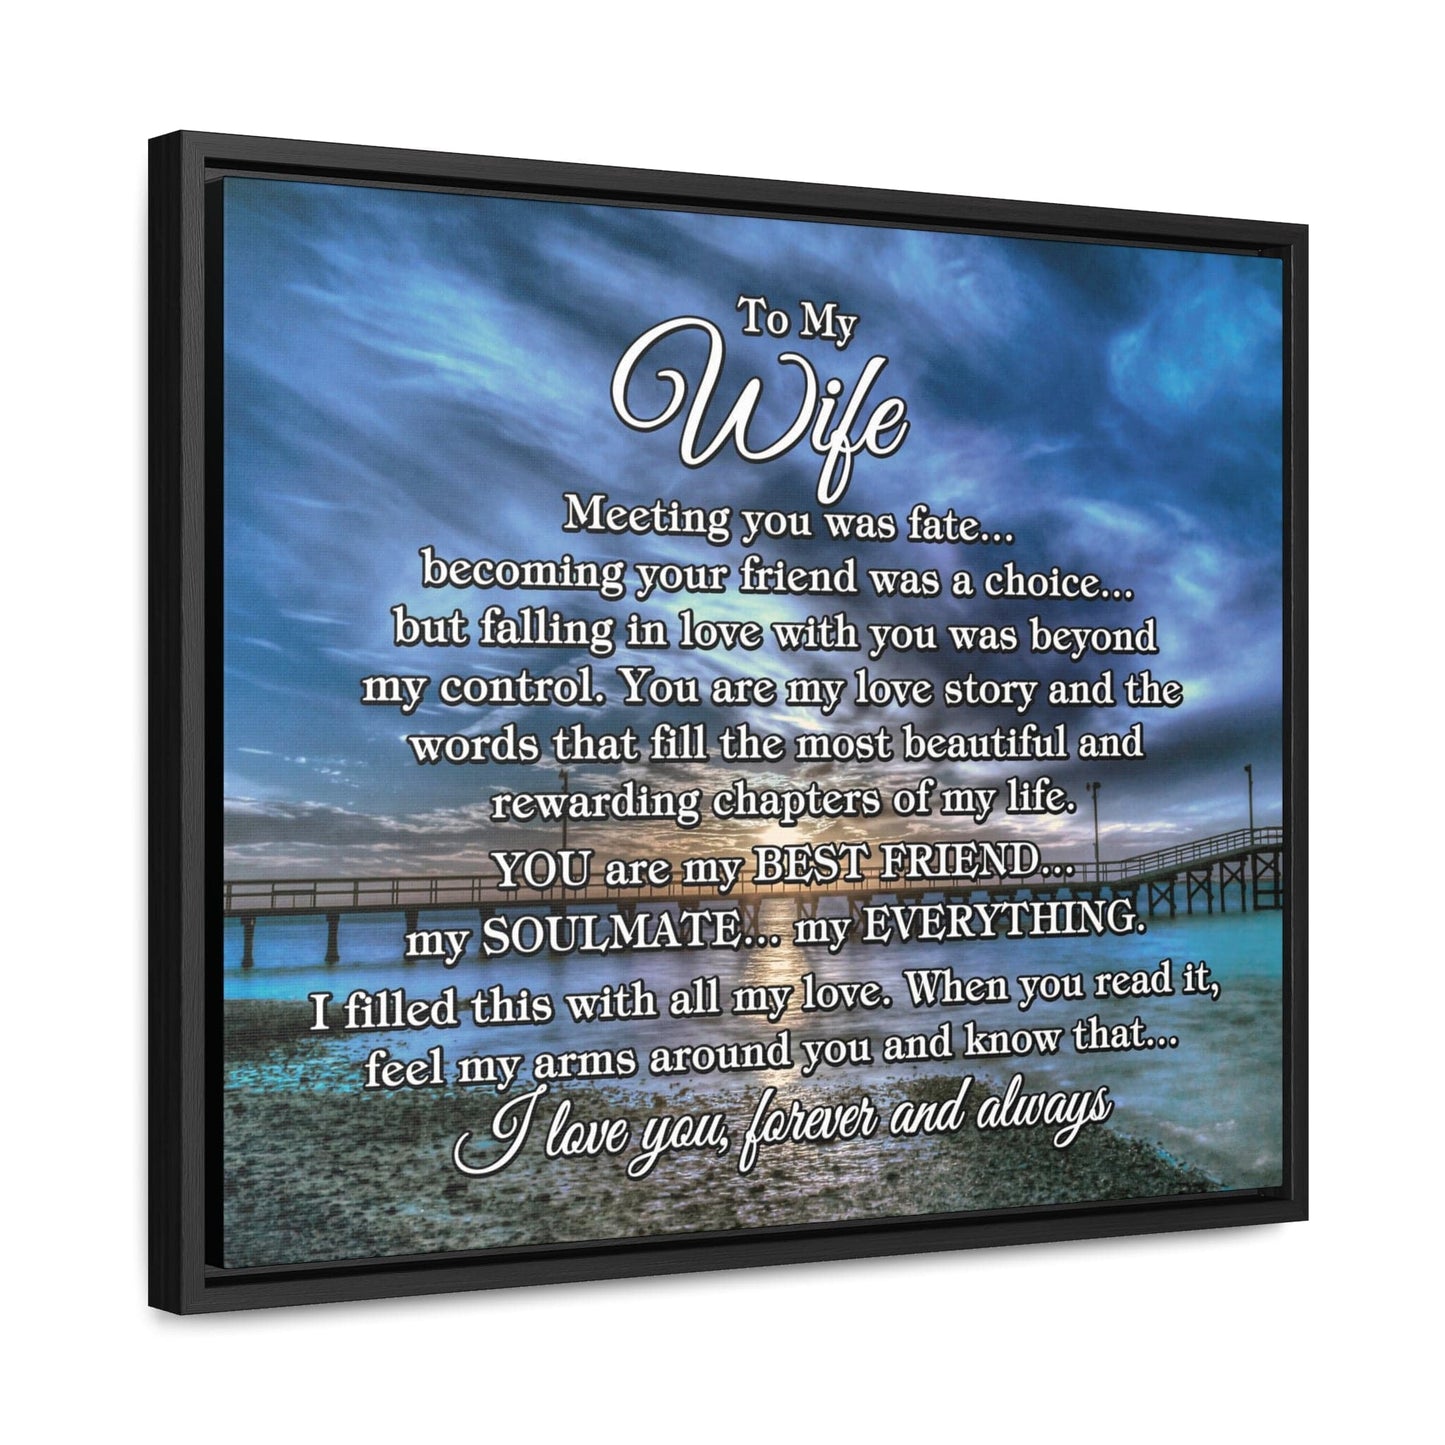 To My Wife "Meeting you was..." Framed Canvas (Gulf Pier Blue Sunset)